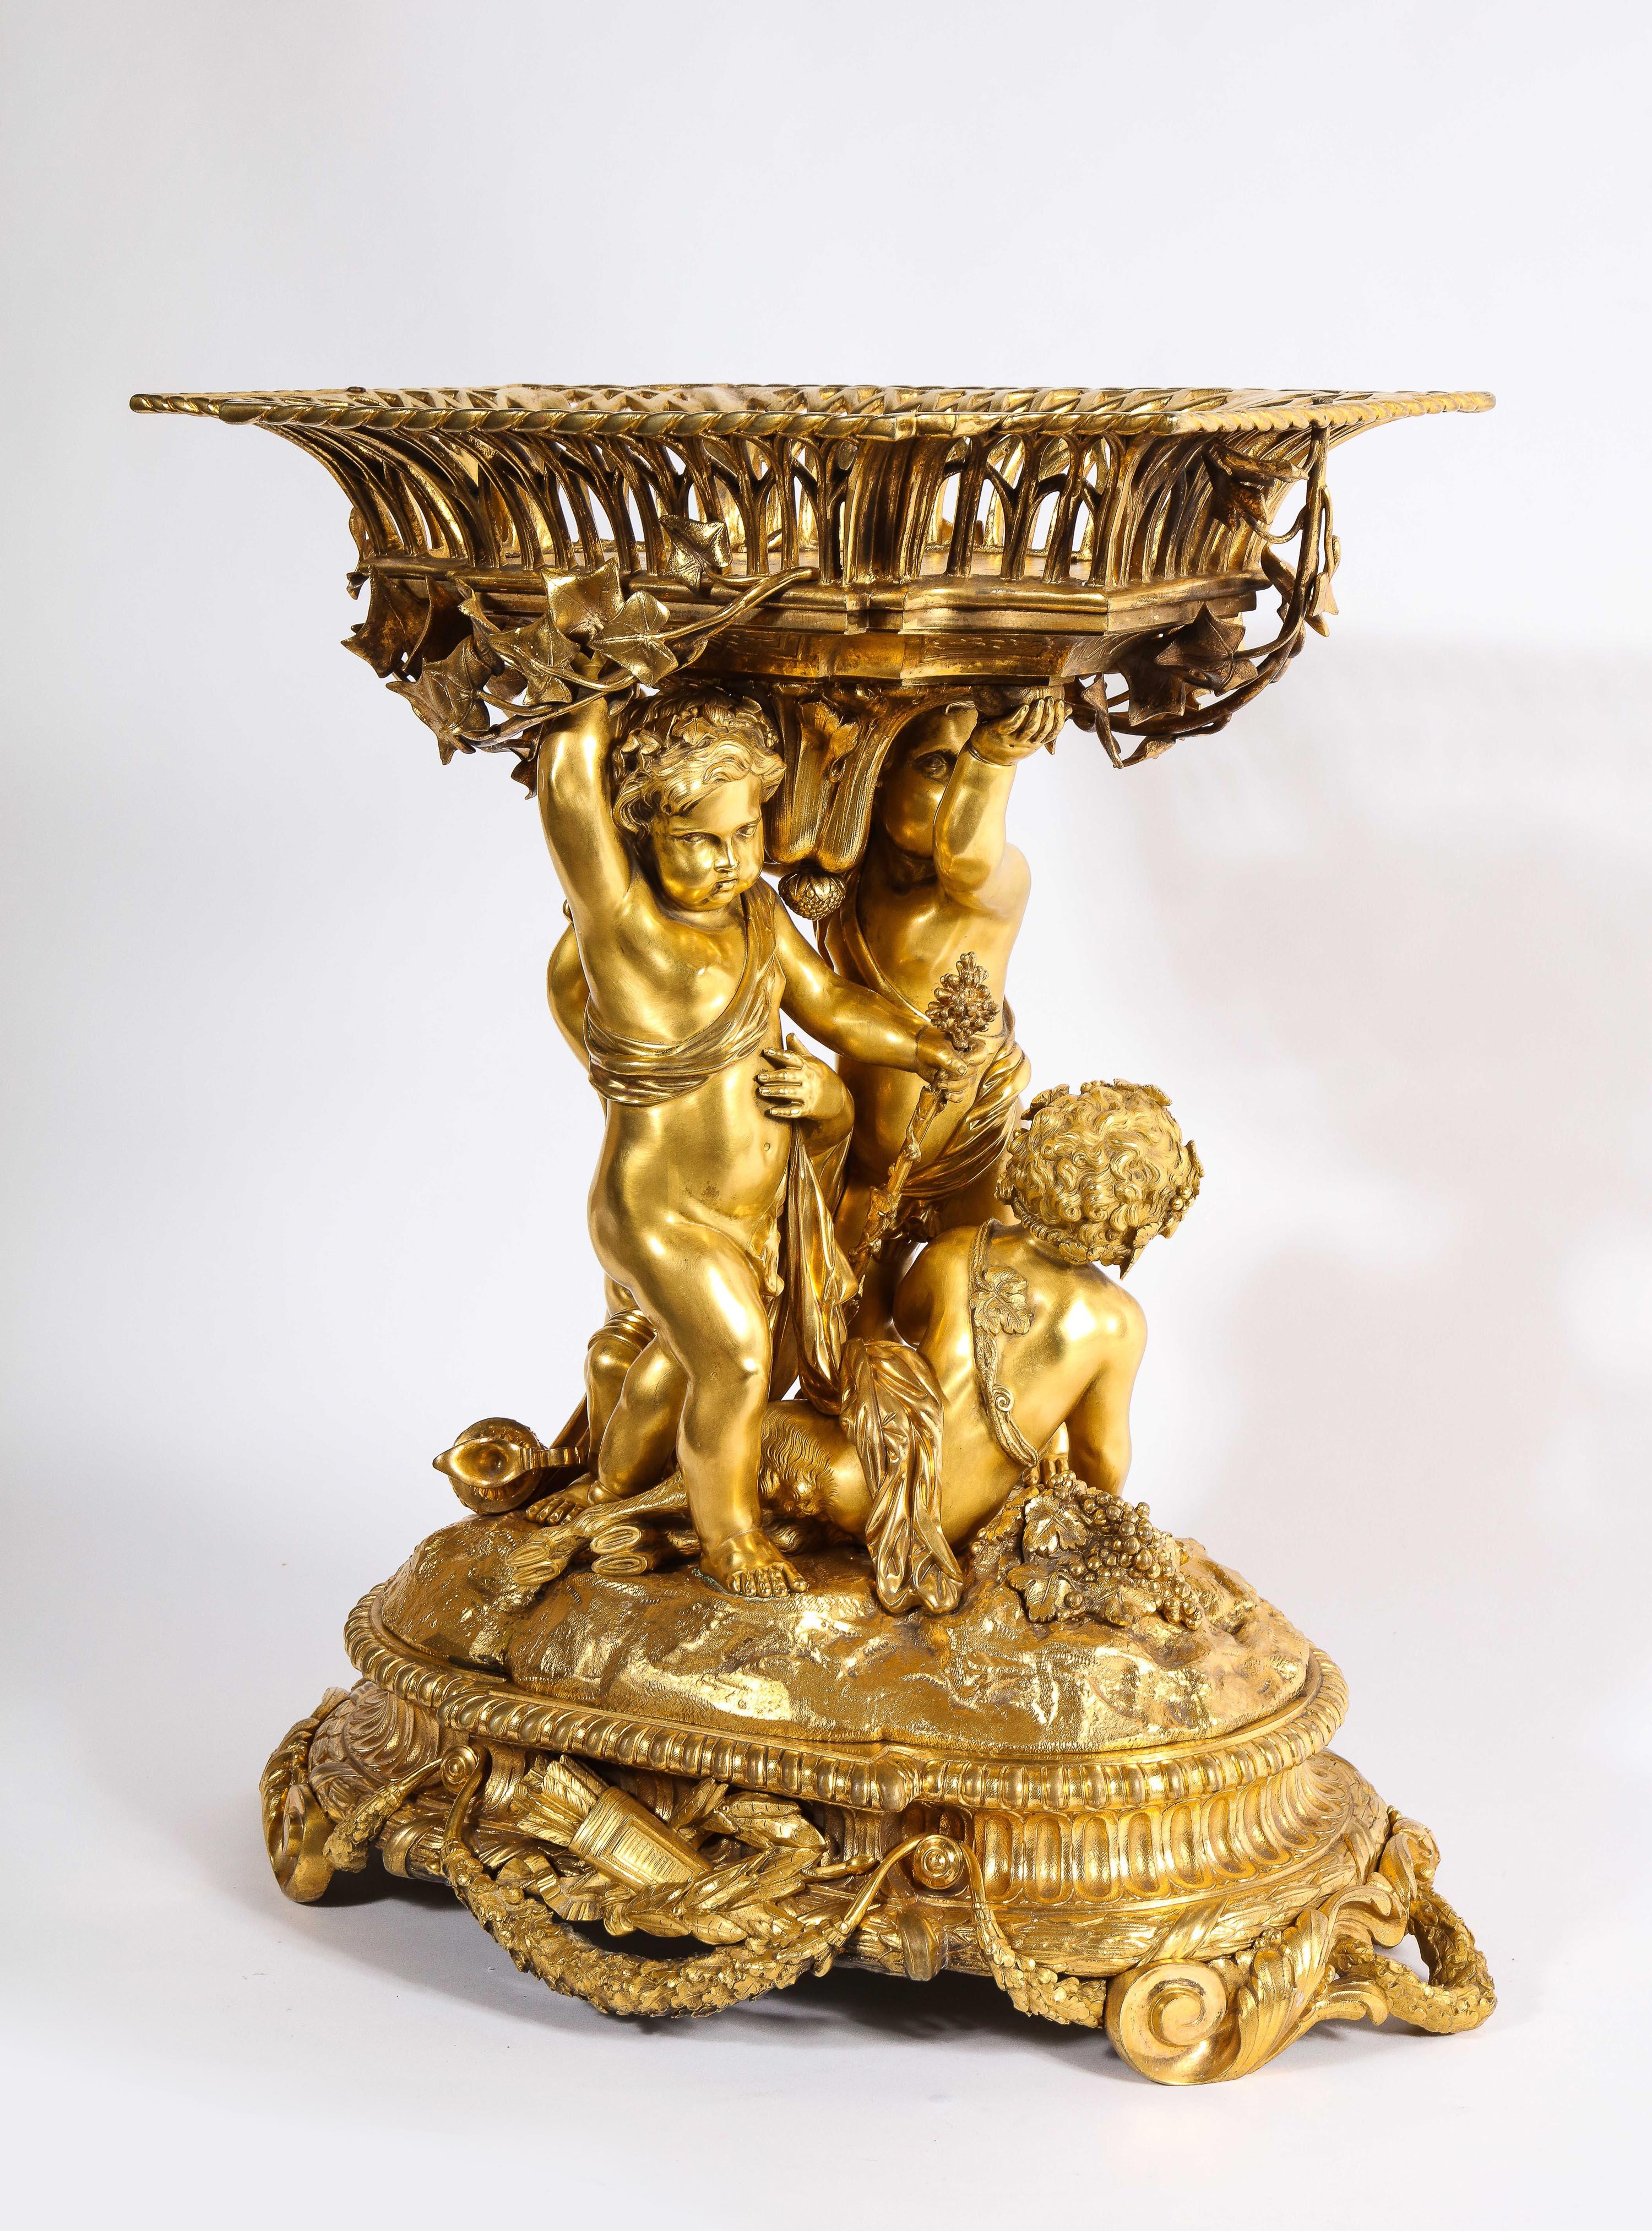 An exquisite Napoleon III French ormolu figural basket centerpiece, Circa 1880, Attributed to Alfred Emmanuel Louis Beurdeley.

Depicting four mercury-gilded bronze ormolu cherubs holding a basket, the base with trophies and scrolling. 

This